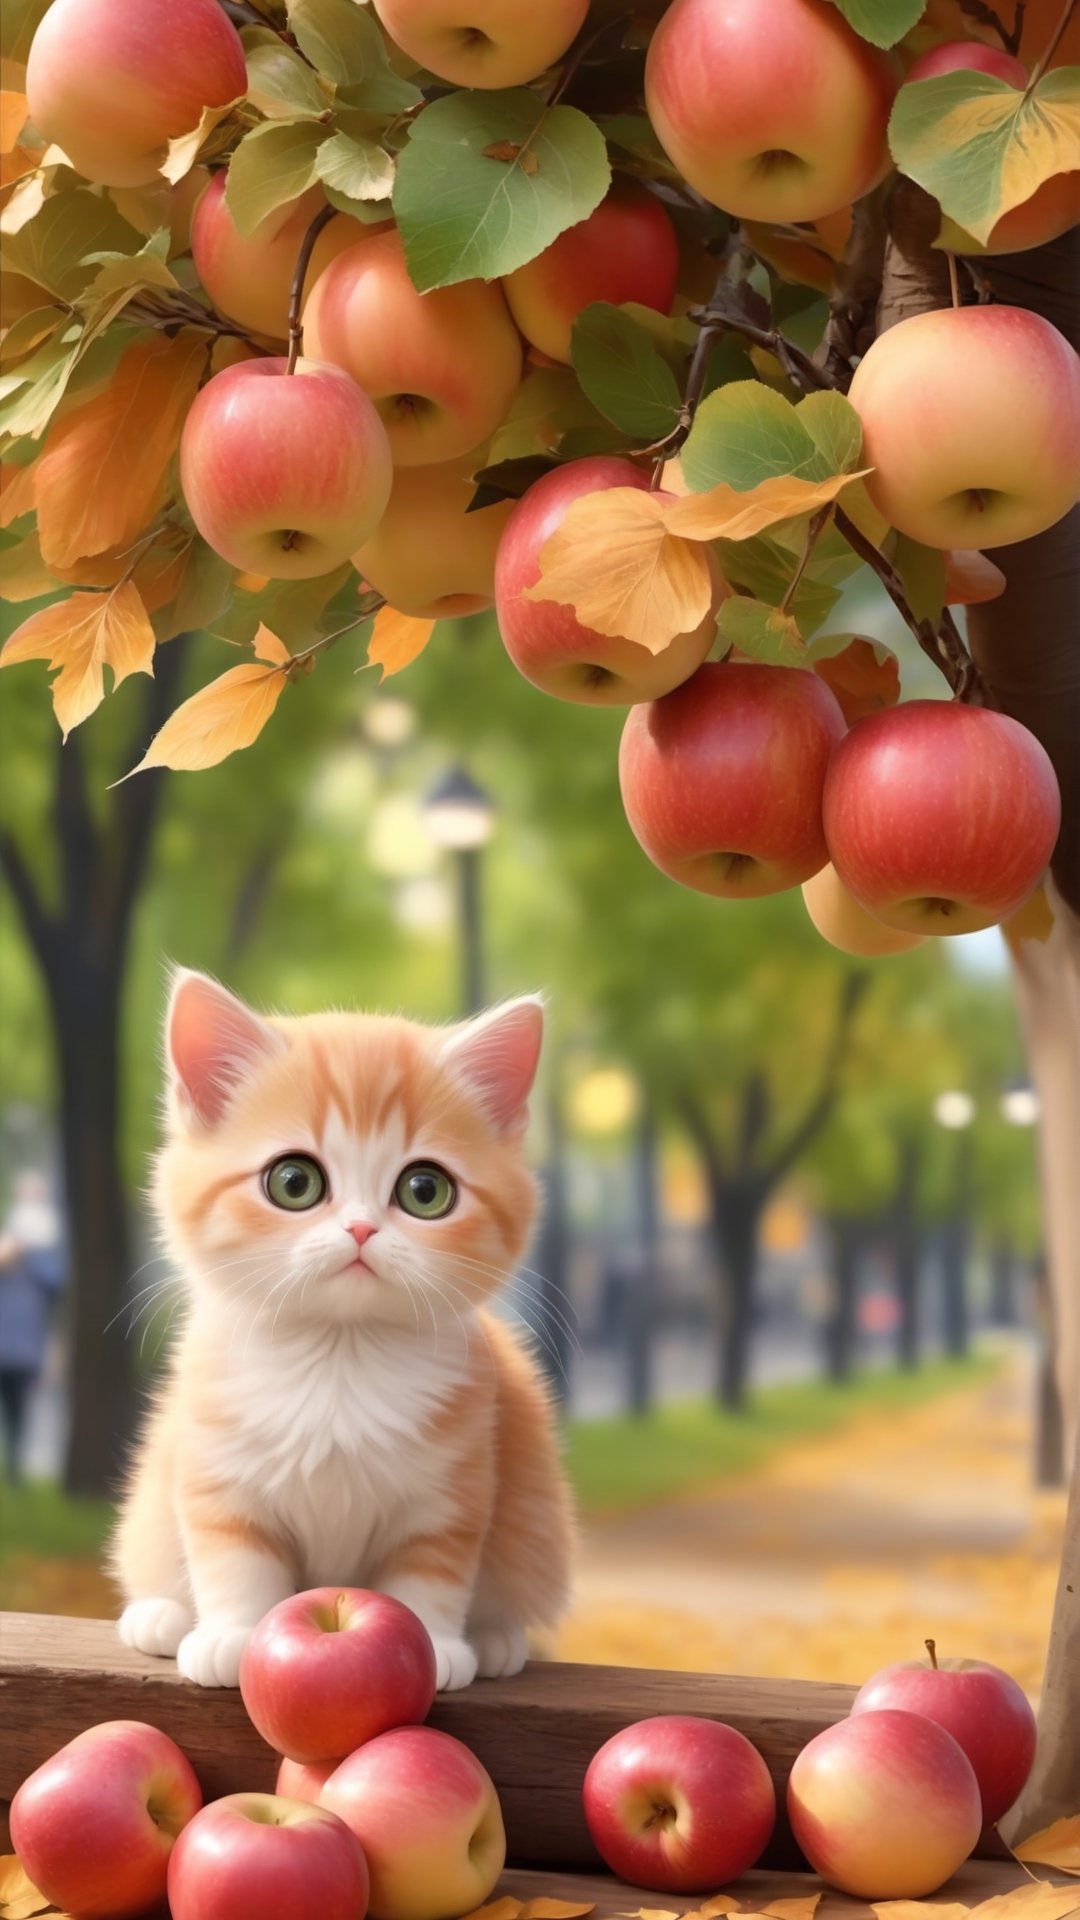  Autumn style, realistic high quality orange tree, apples full the branch, maple leaves falling, Side view shot, Turn around and look ahead, A beautiful big eyes and adorable little girl with two cute little fluffy fat fat kittens walking on the apples tree branch from the treeand street, smiled happily,big eyes so cute and beautiful, under the tree have a table, and apples and beautiful flowers, maple leaves falling, orange near flowers, Turn around and look viewers , pink flowers blooming fantastic amazing and romantic lighting bokeh, pink flowers blooming realistic and green plants amazing tale and lighting as background, Xxmix_Catecat